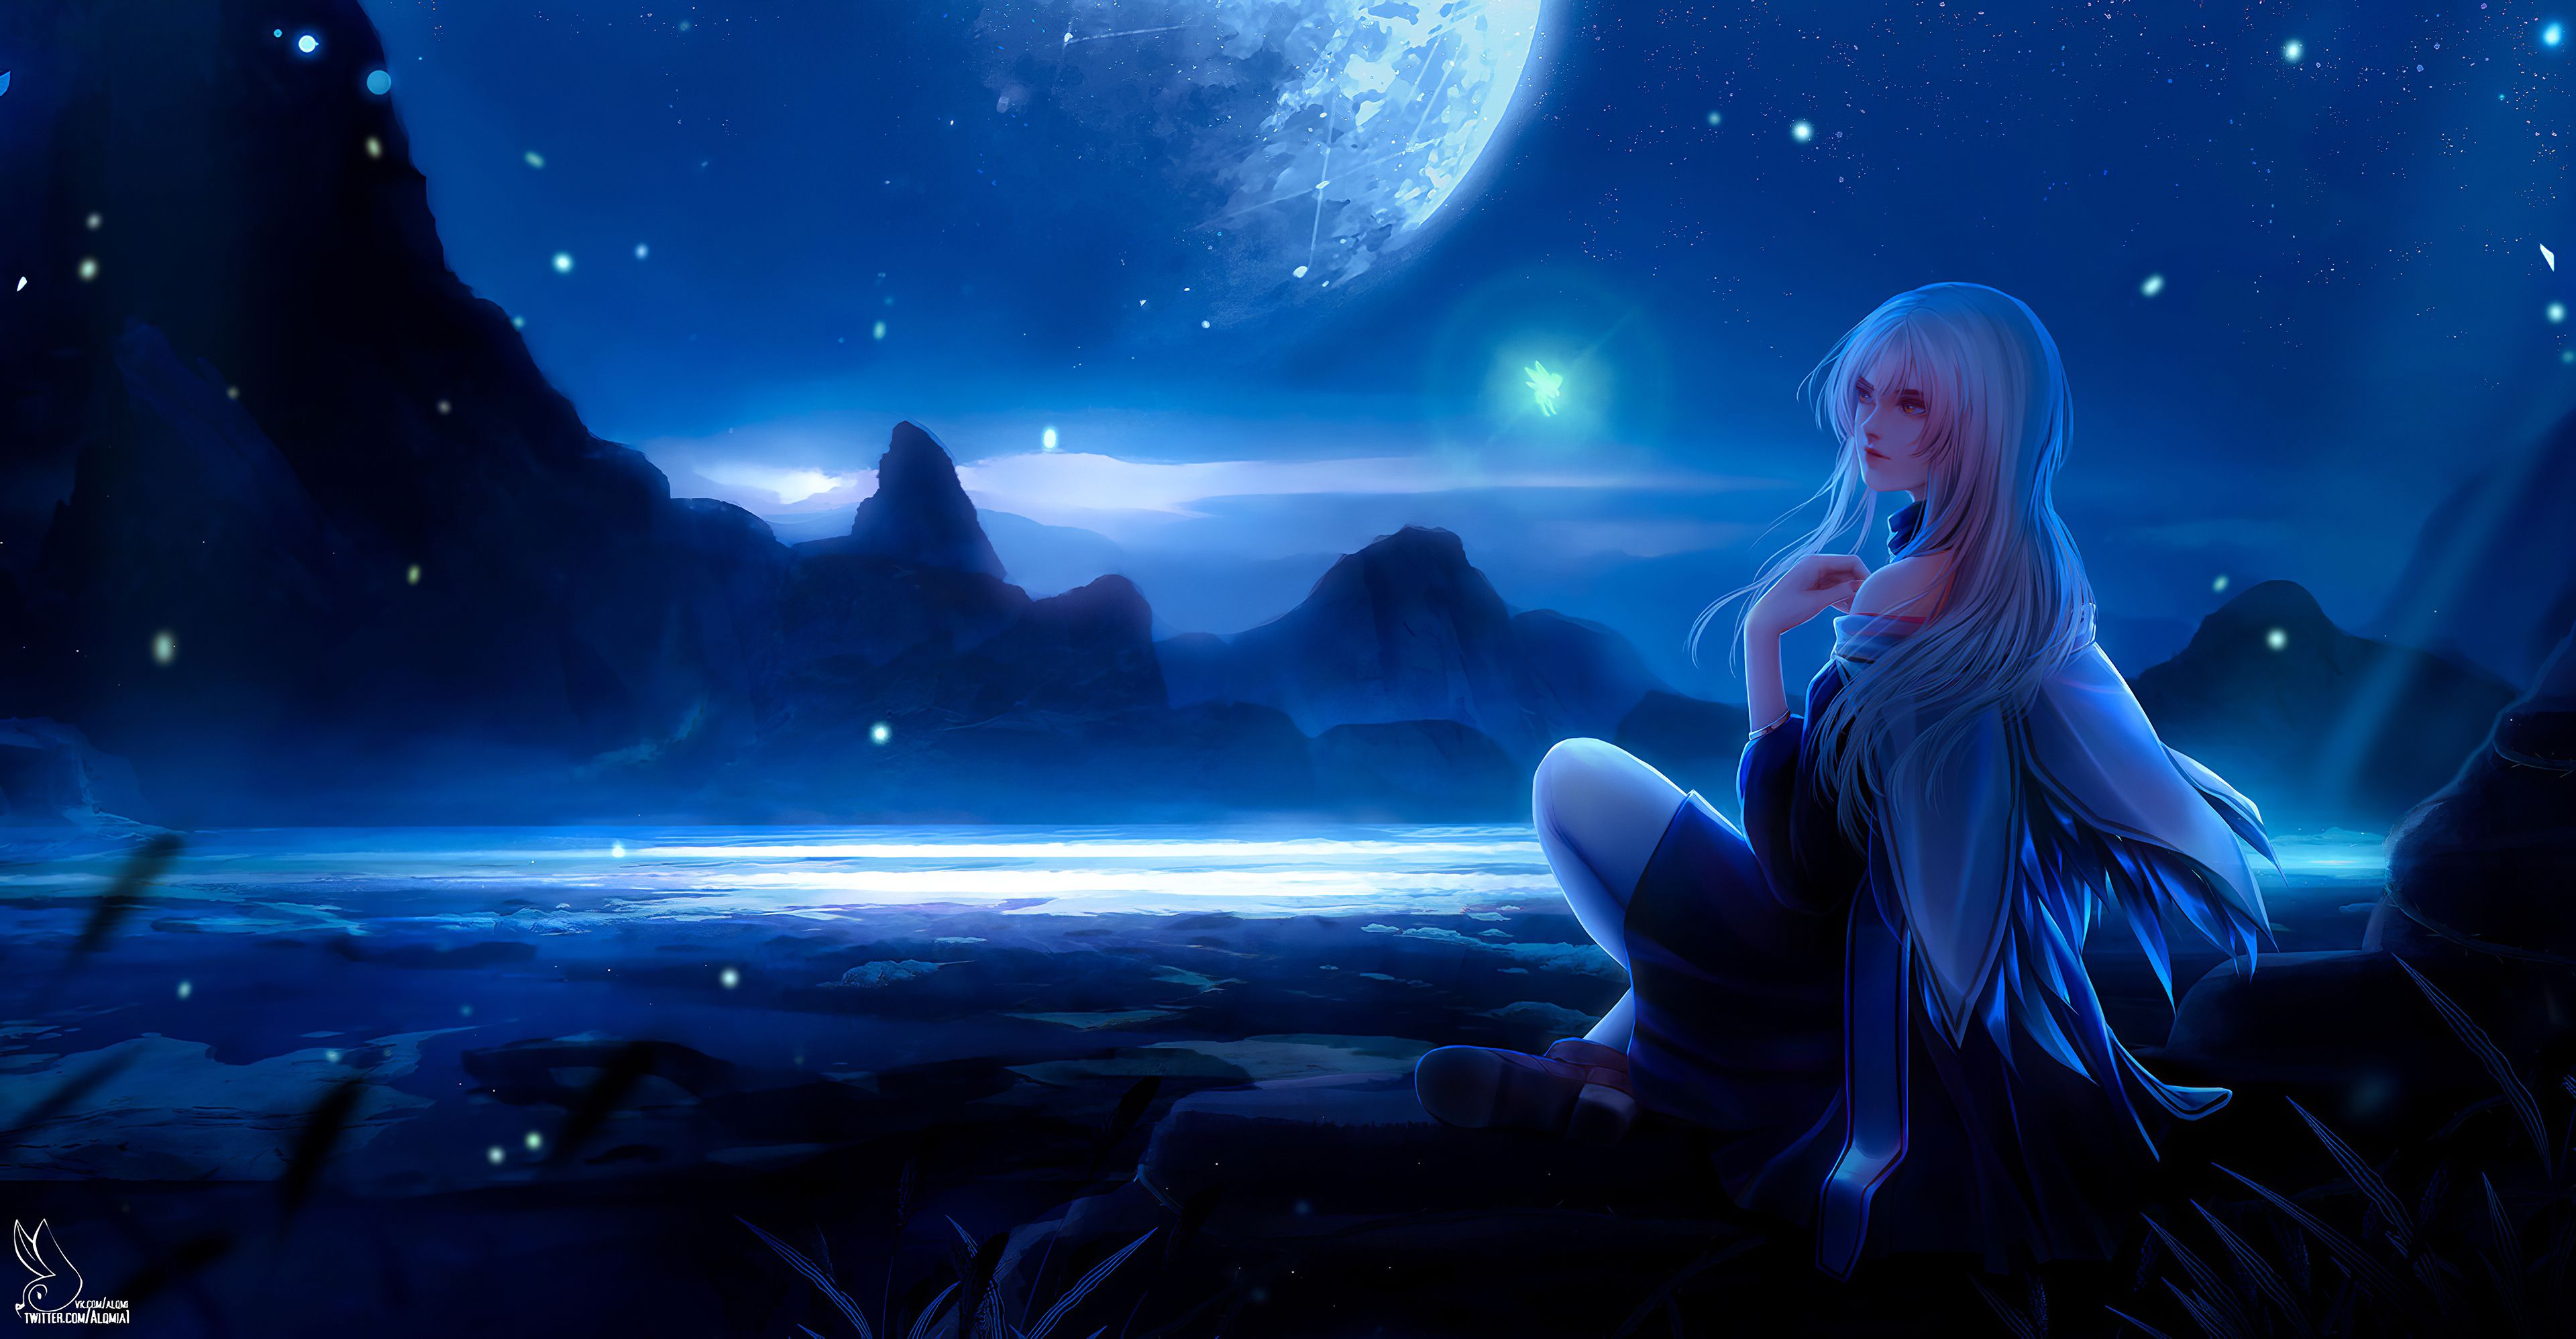 Inside Moonlight Anime Girl 4k, HD Anime, 4k Wallpaper, Image, Background, Photo and Picture